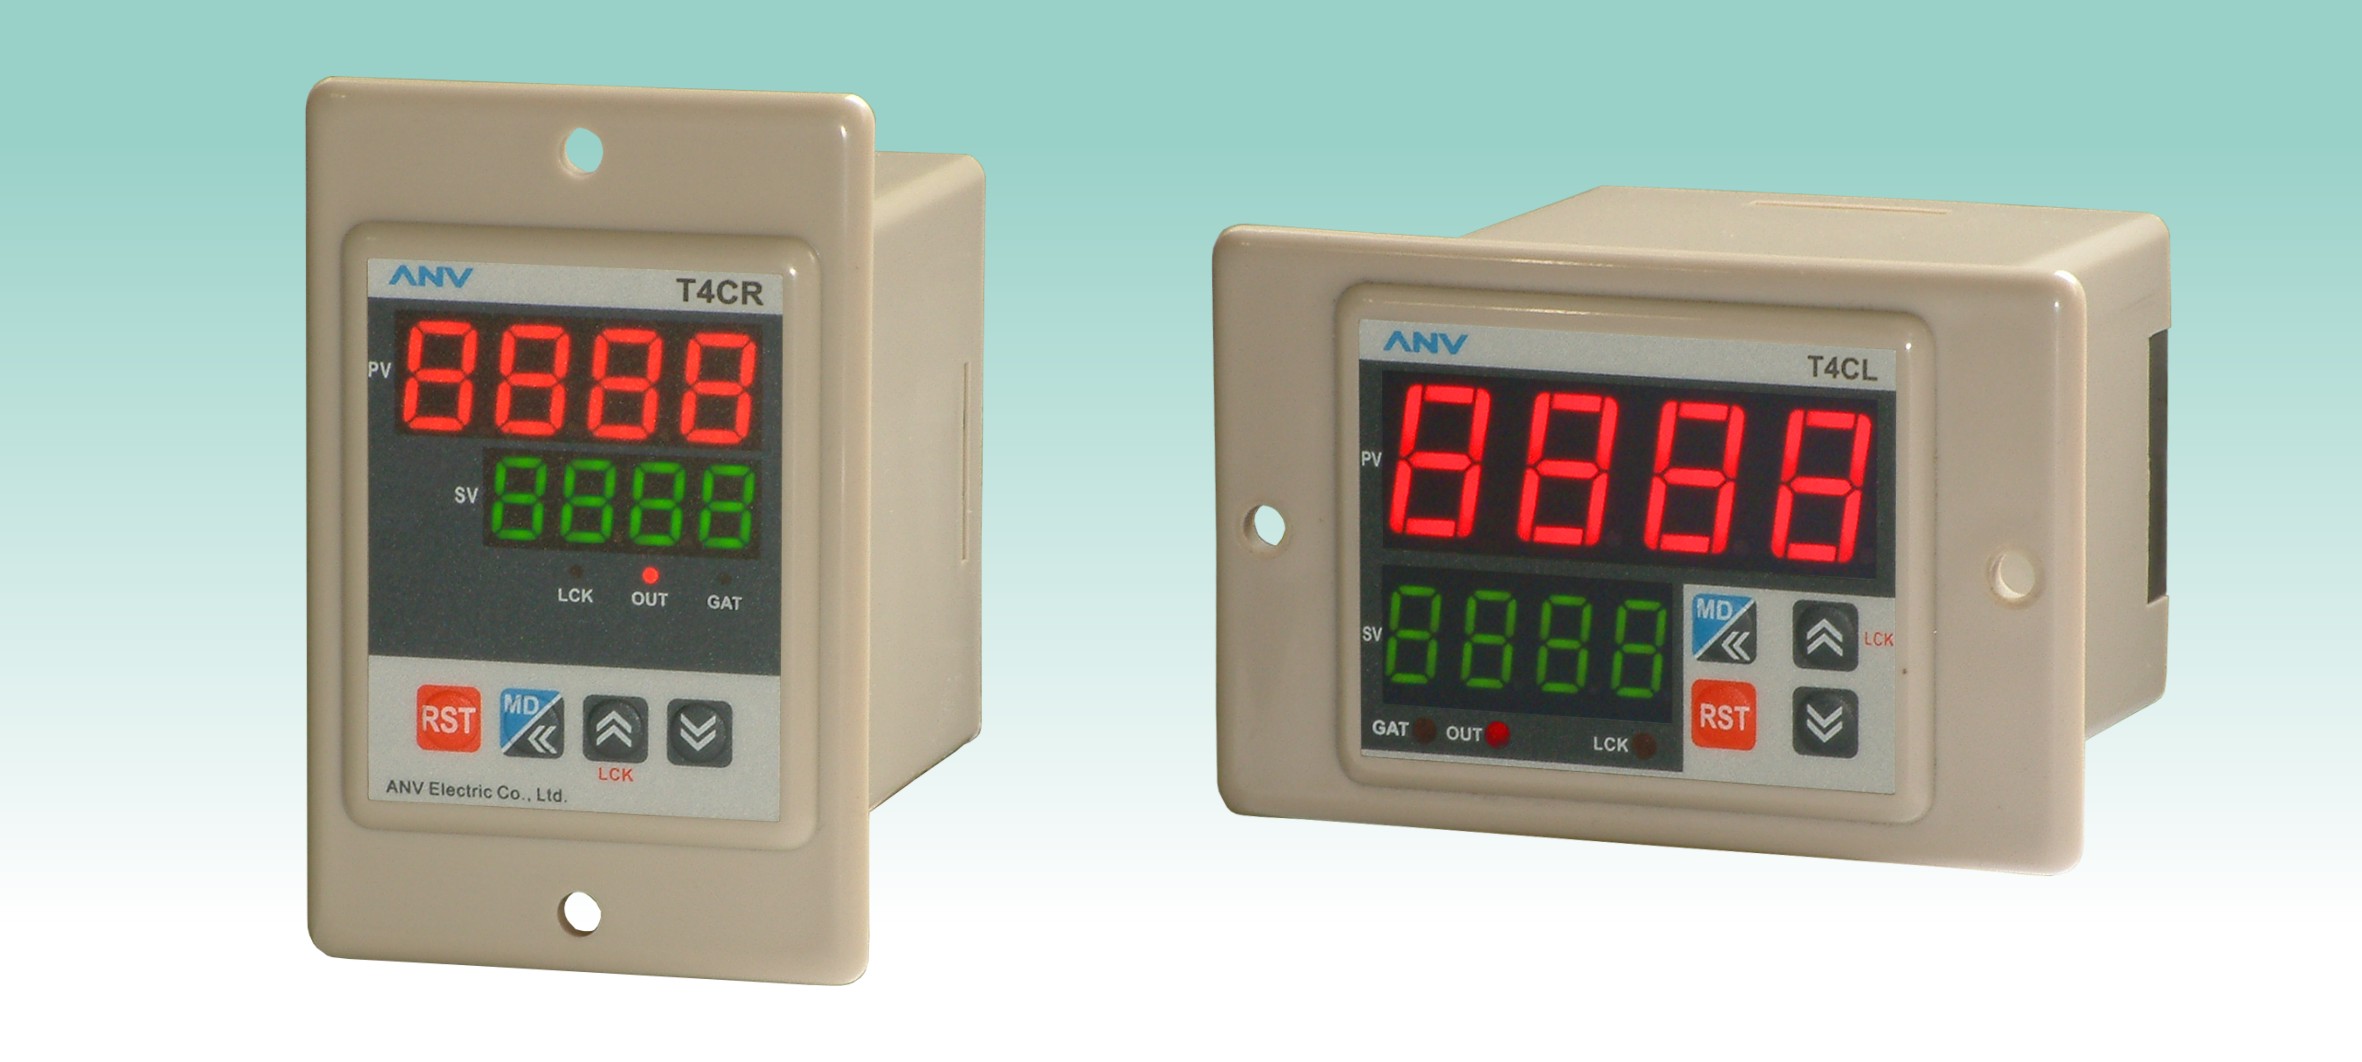 Multi-Function Digital Counter-T4CR, T4CL